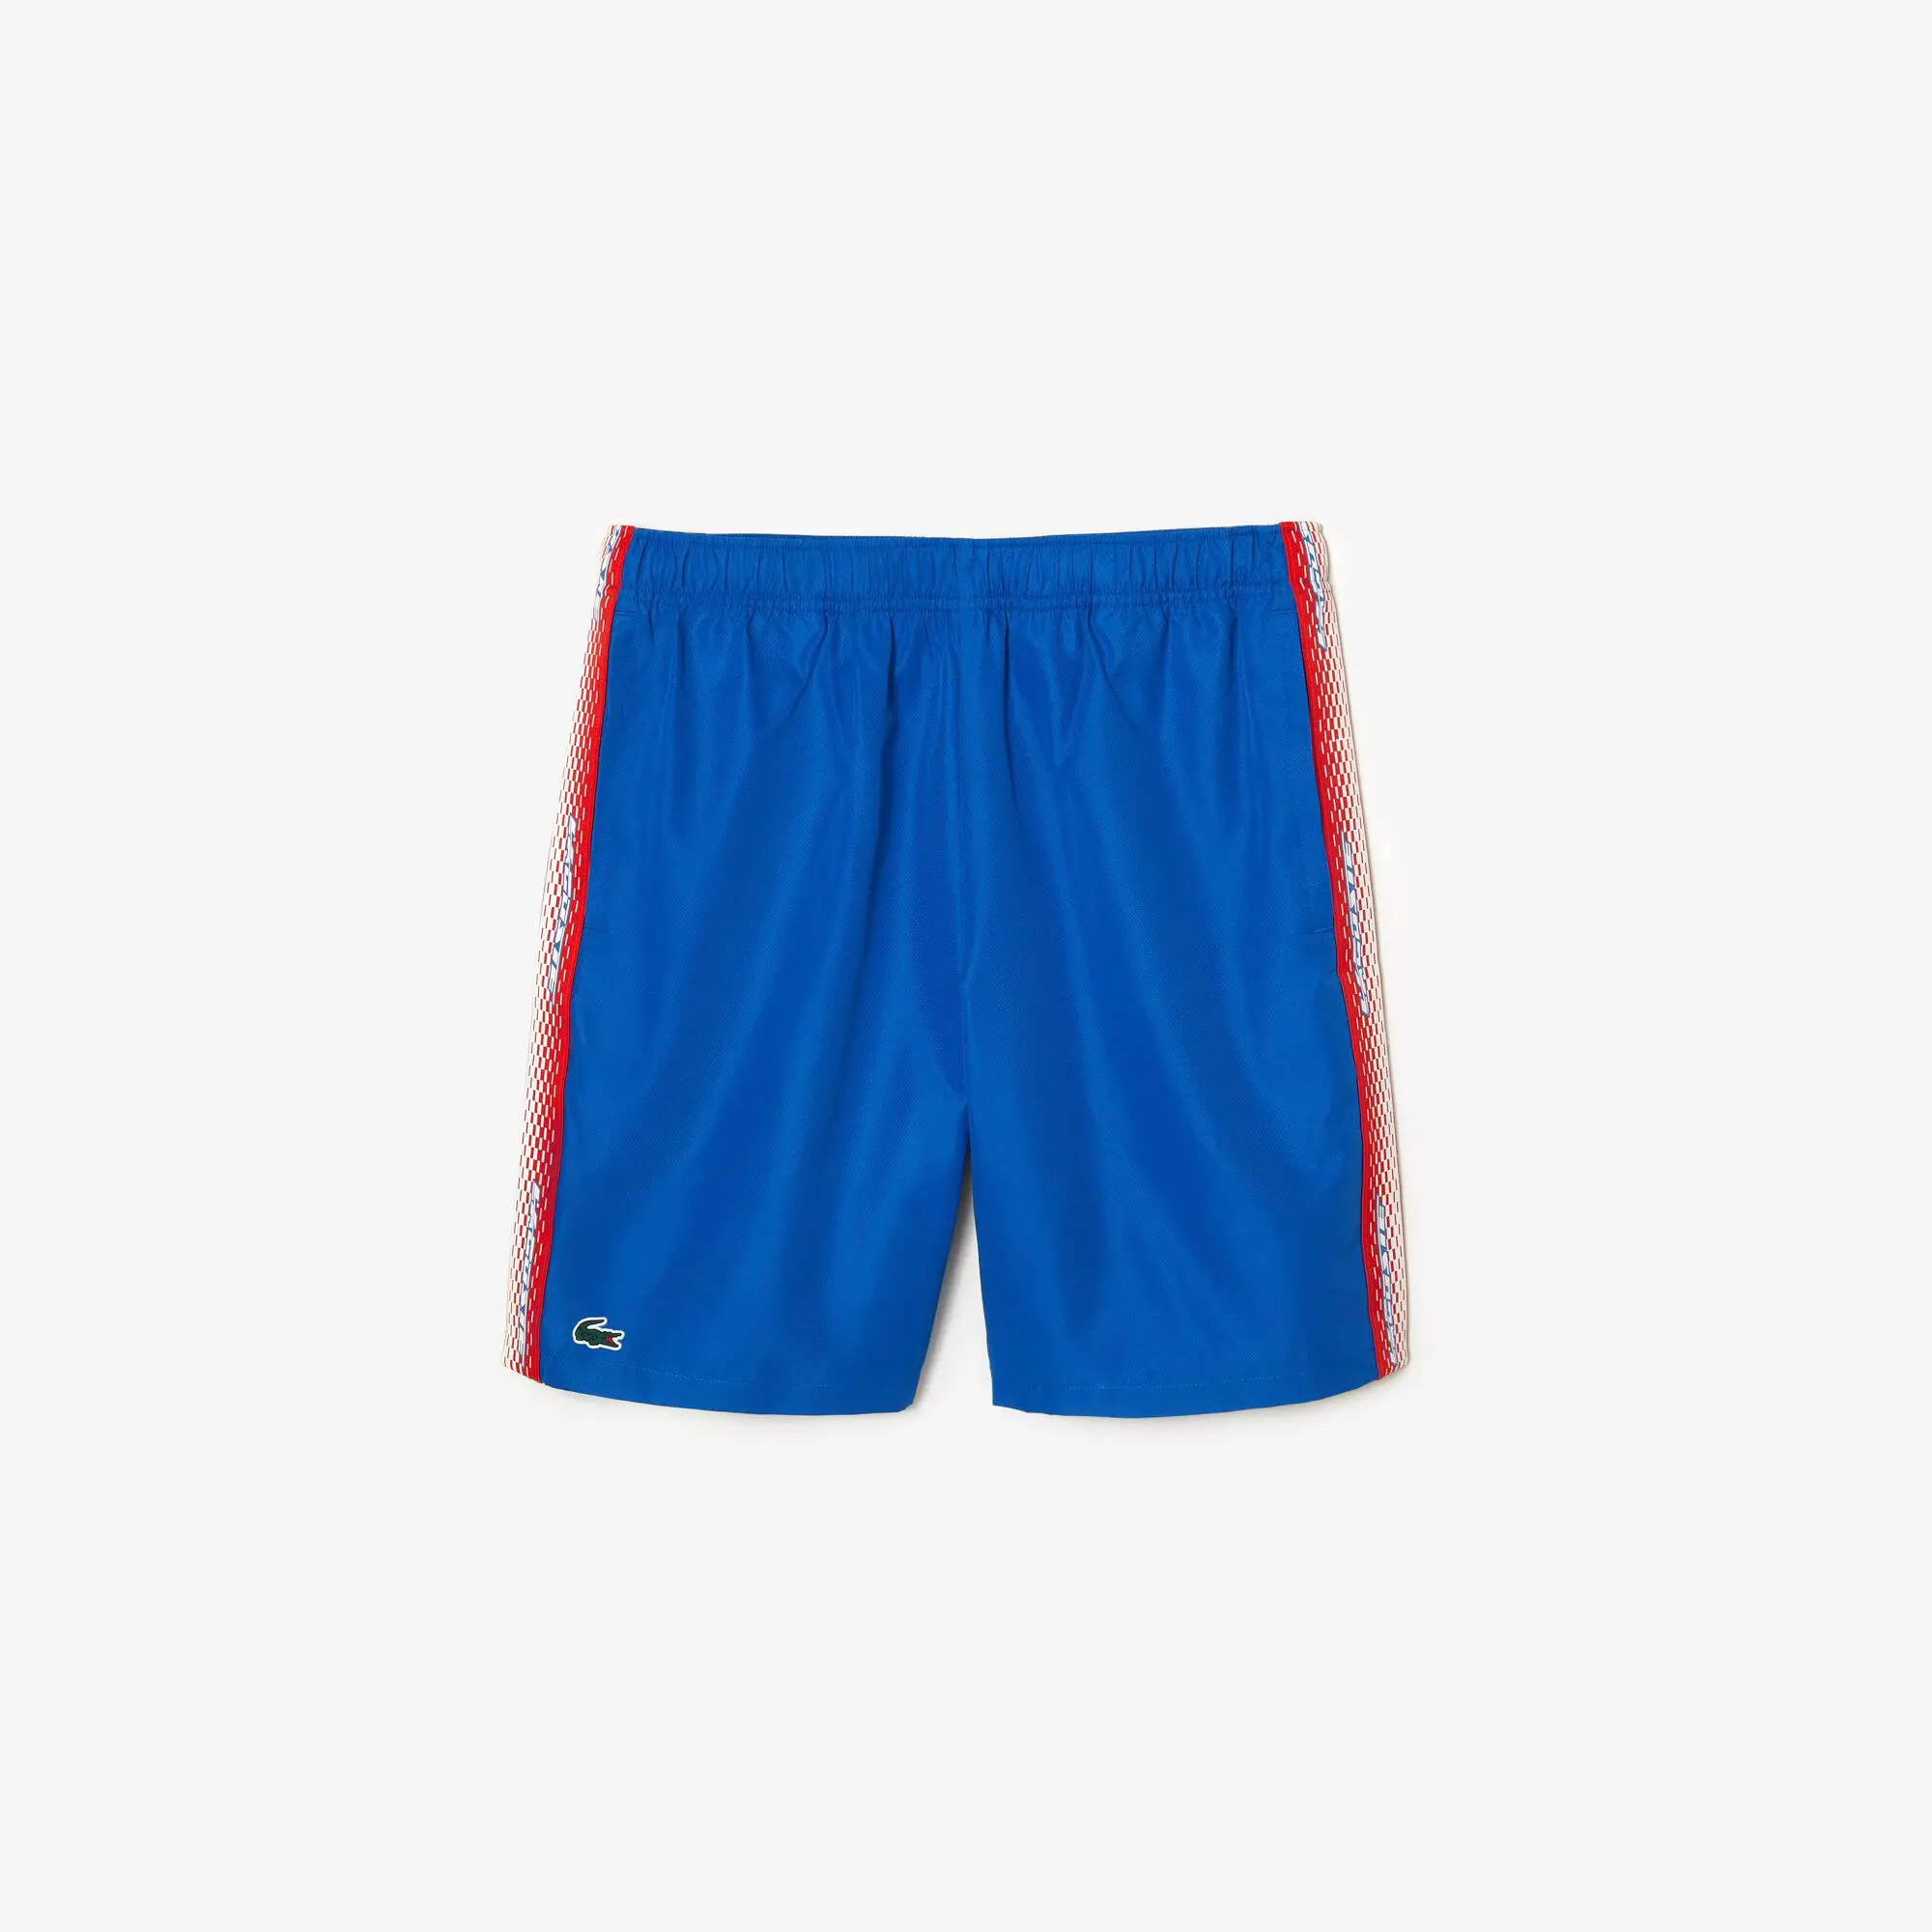 Lacoste Men’s Lacoste Recycled Polyester Tennis Shorts. 2